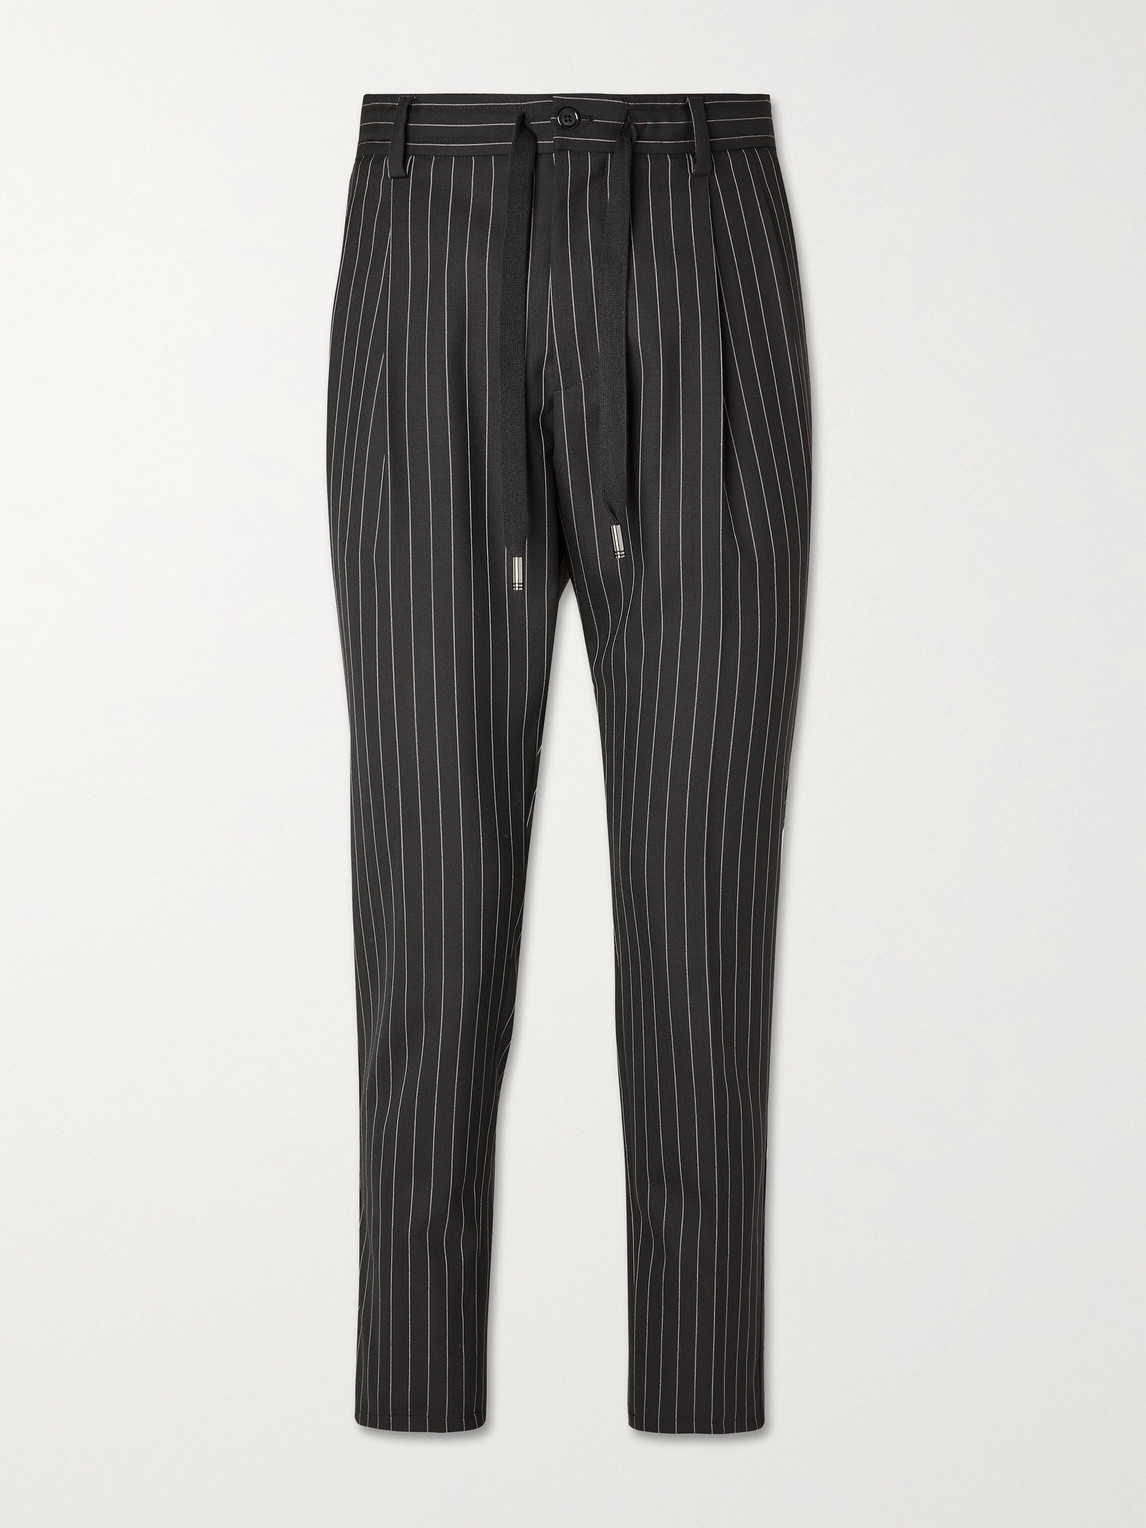 DOLCE & GABBANA SLIM-FIT CROPPED TAPERED PINSTRIPED WOOL DRAWSTRING TROUSERS